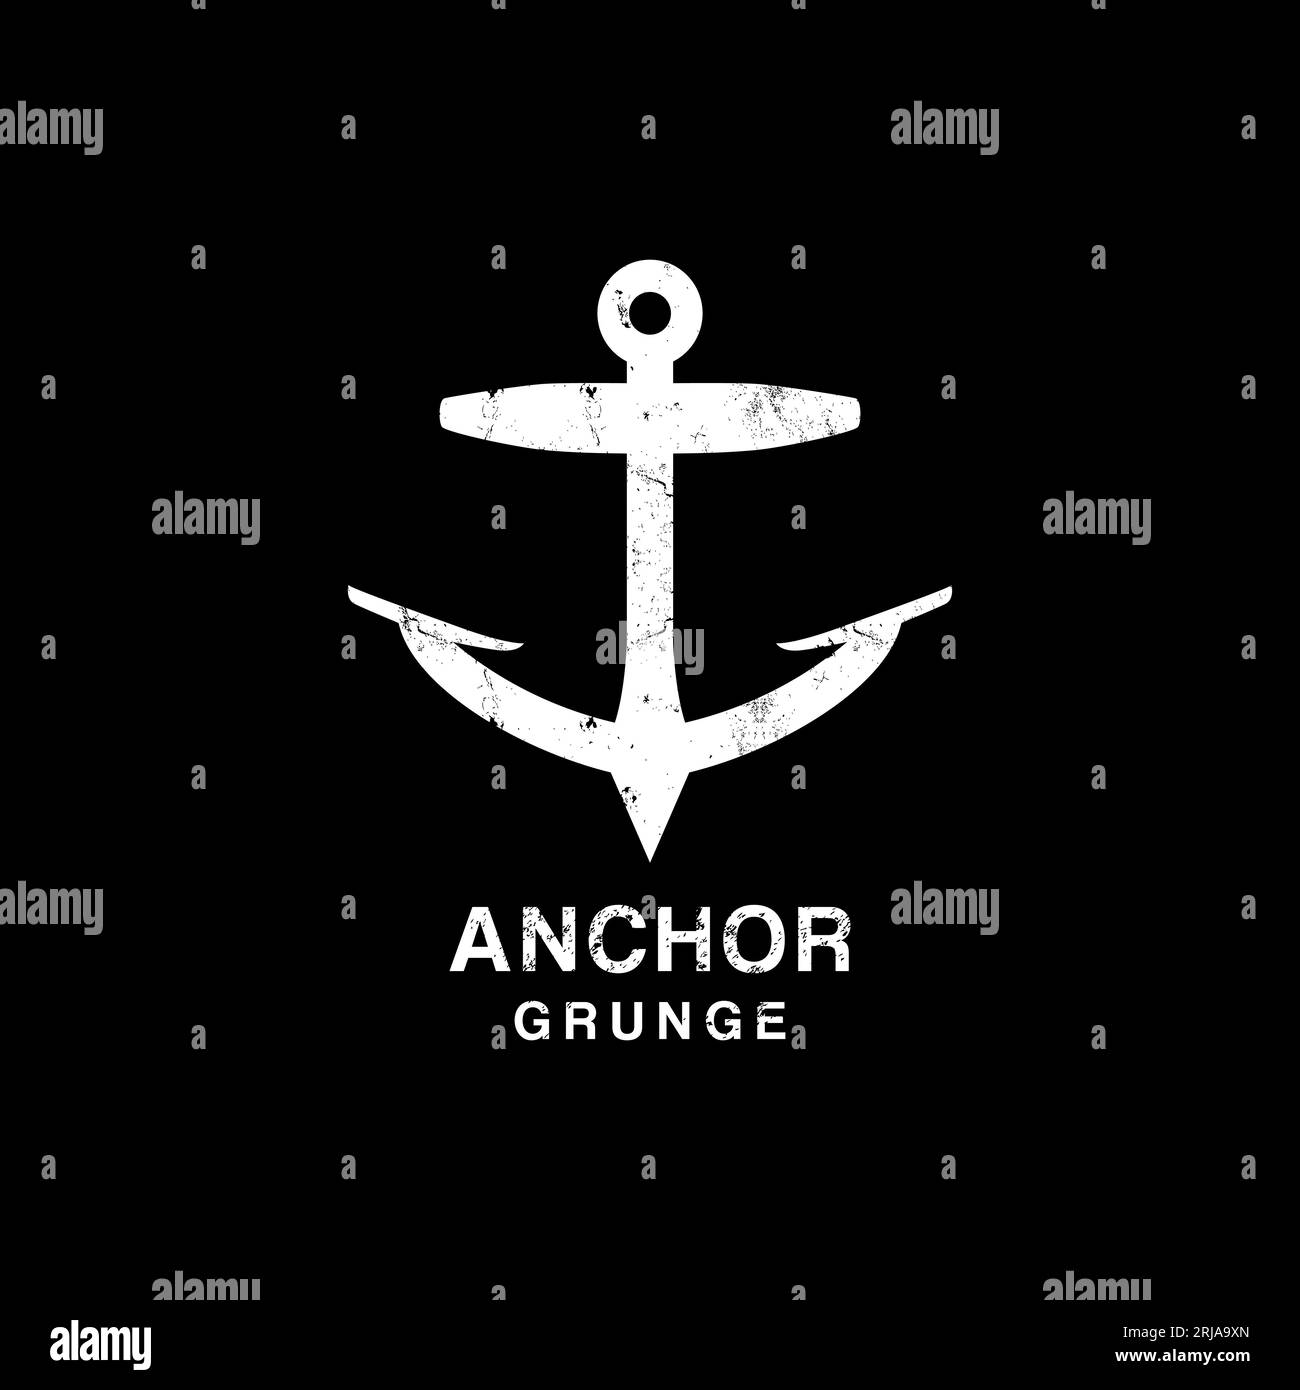 Vintage Anchor Logo Design With Grunge Style Stock Vector